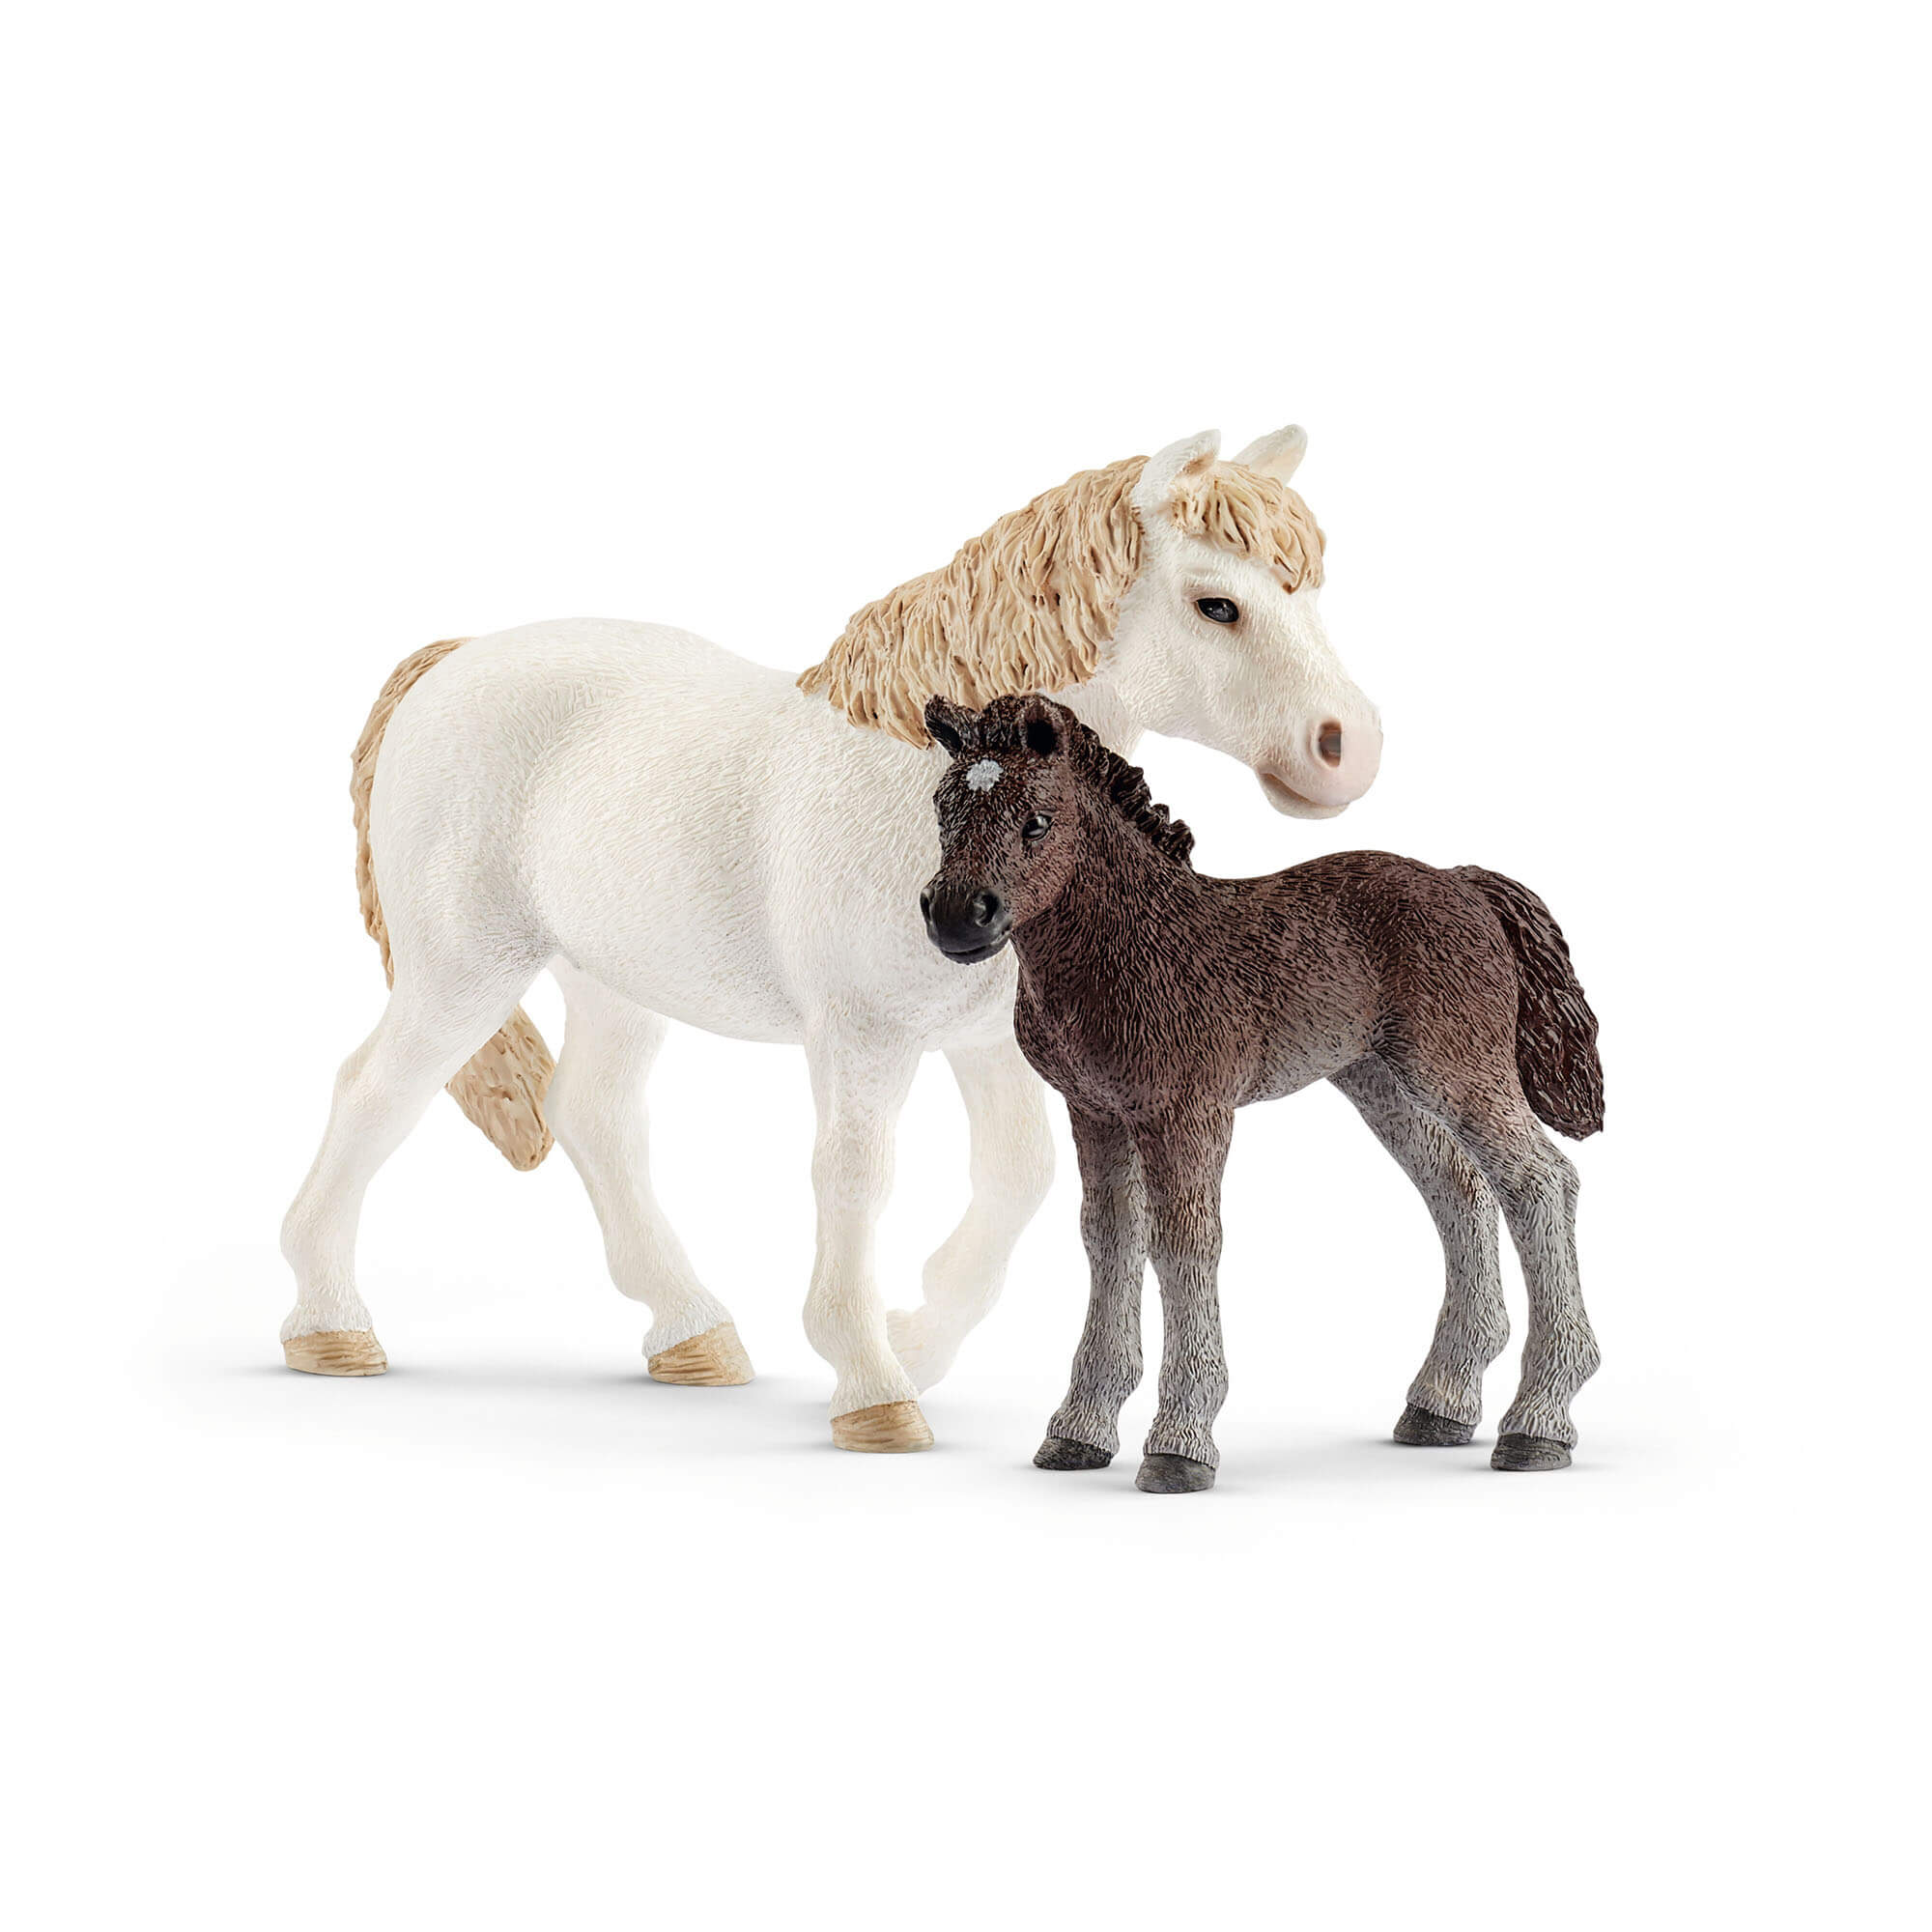 Schleich Farm World Pony Mare And Foal Play Set